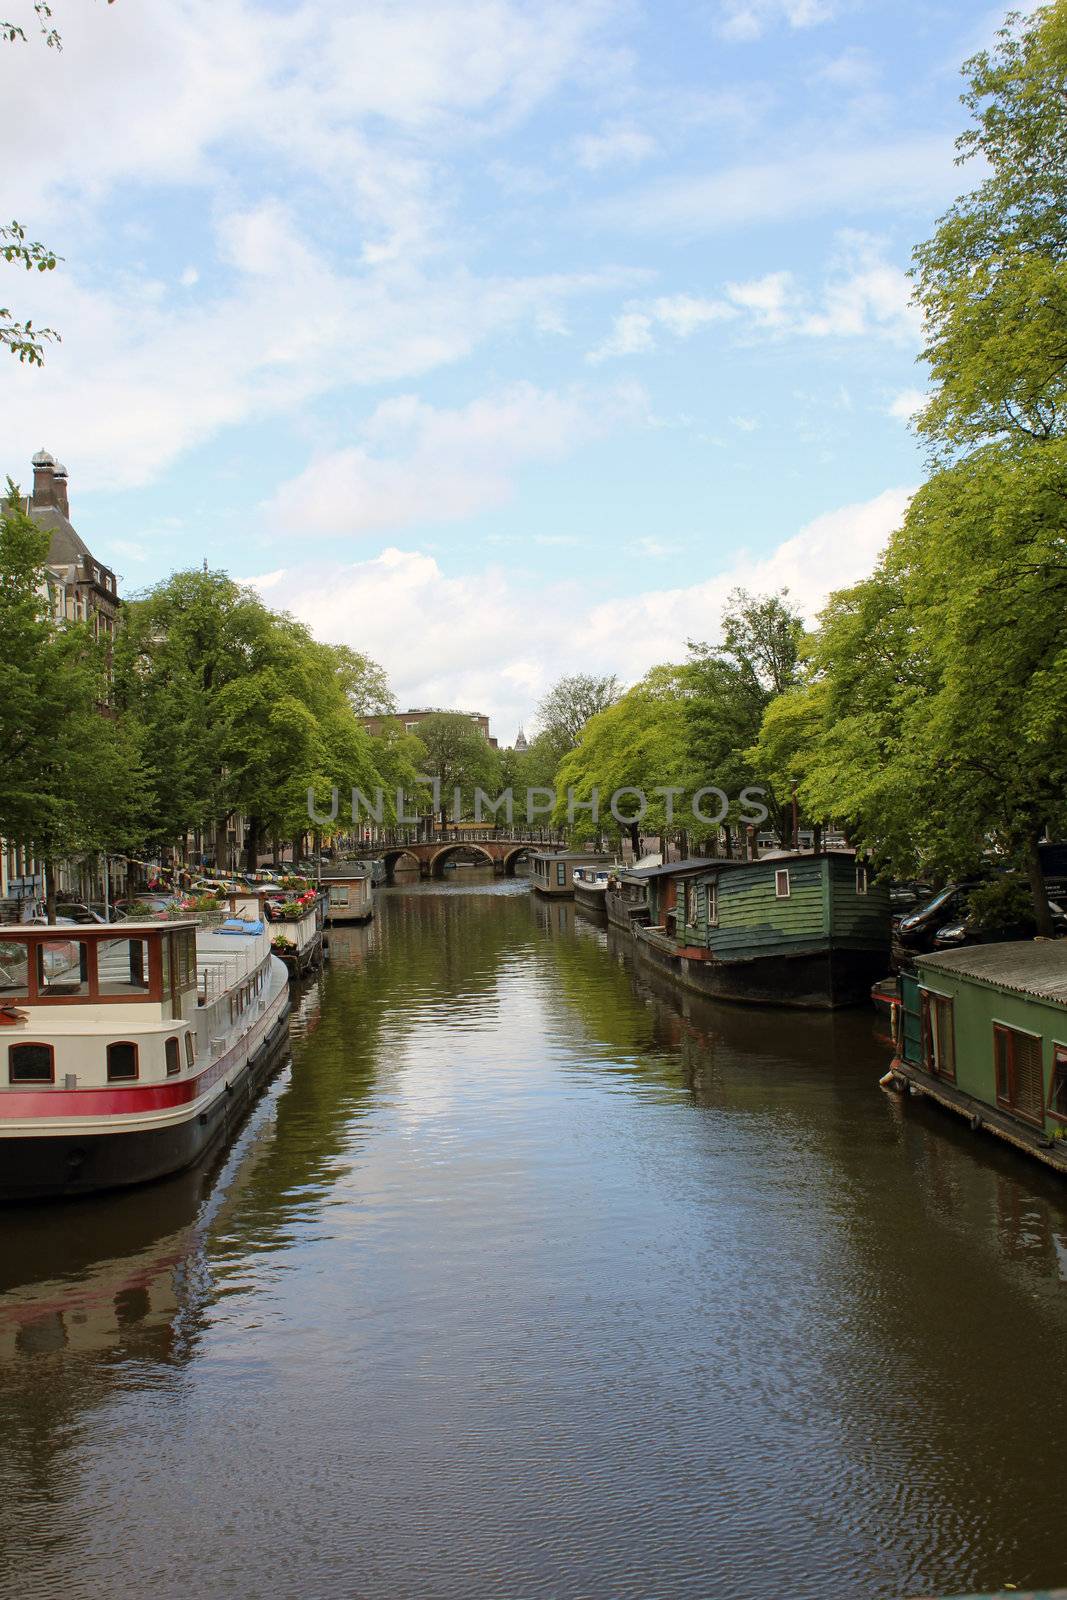 A typical Amsterdam canal with boat houses and a brige